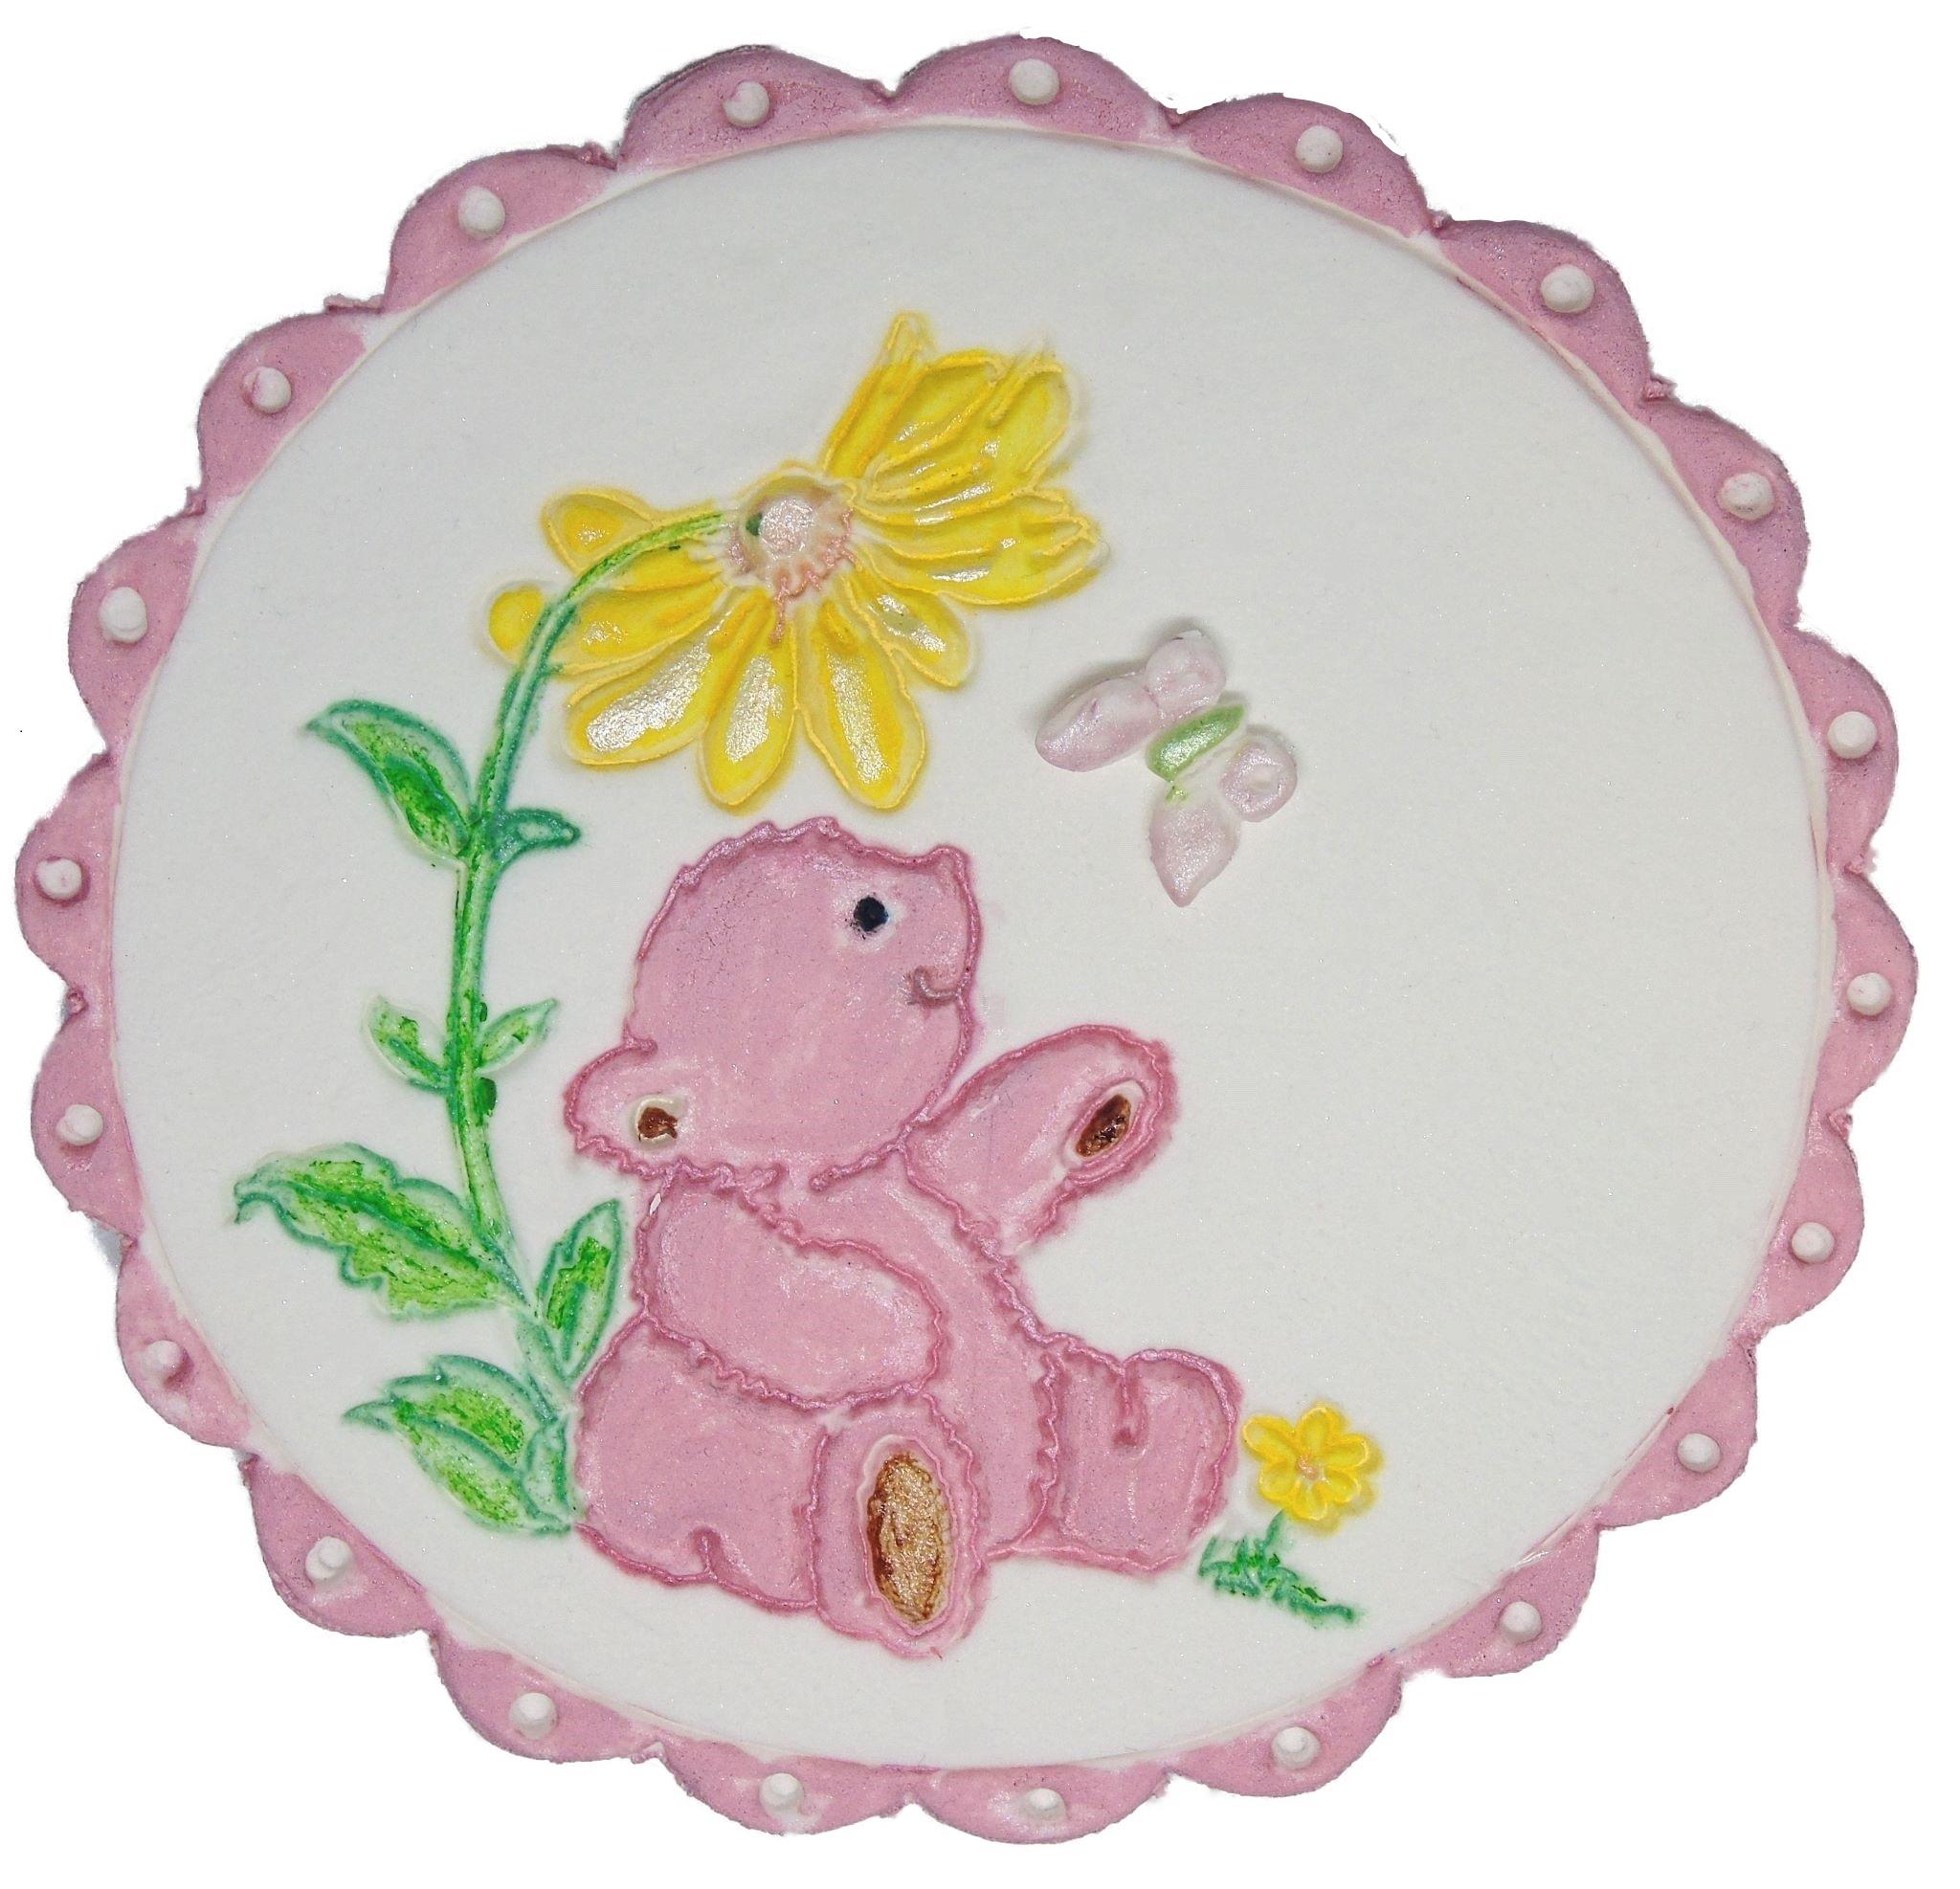 Lovely Hand Painted  Pink Teddy Vegan Cake Topper Decoration